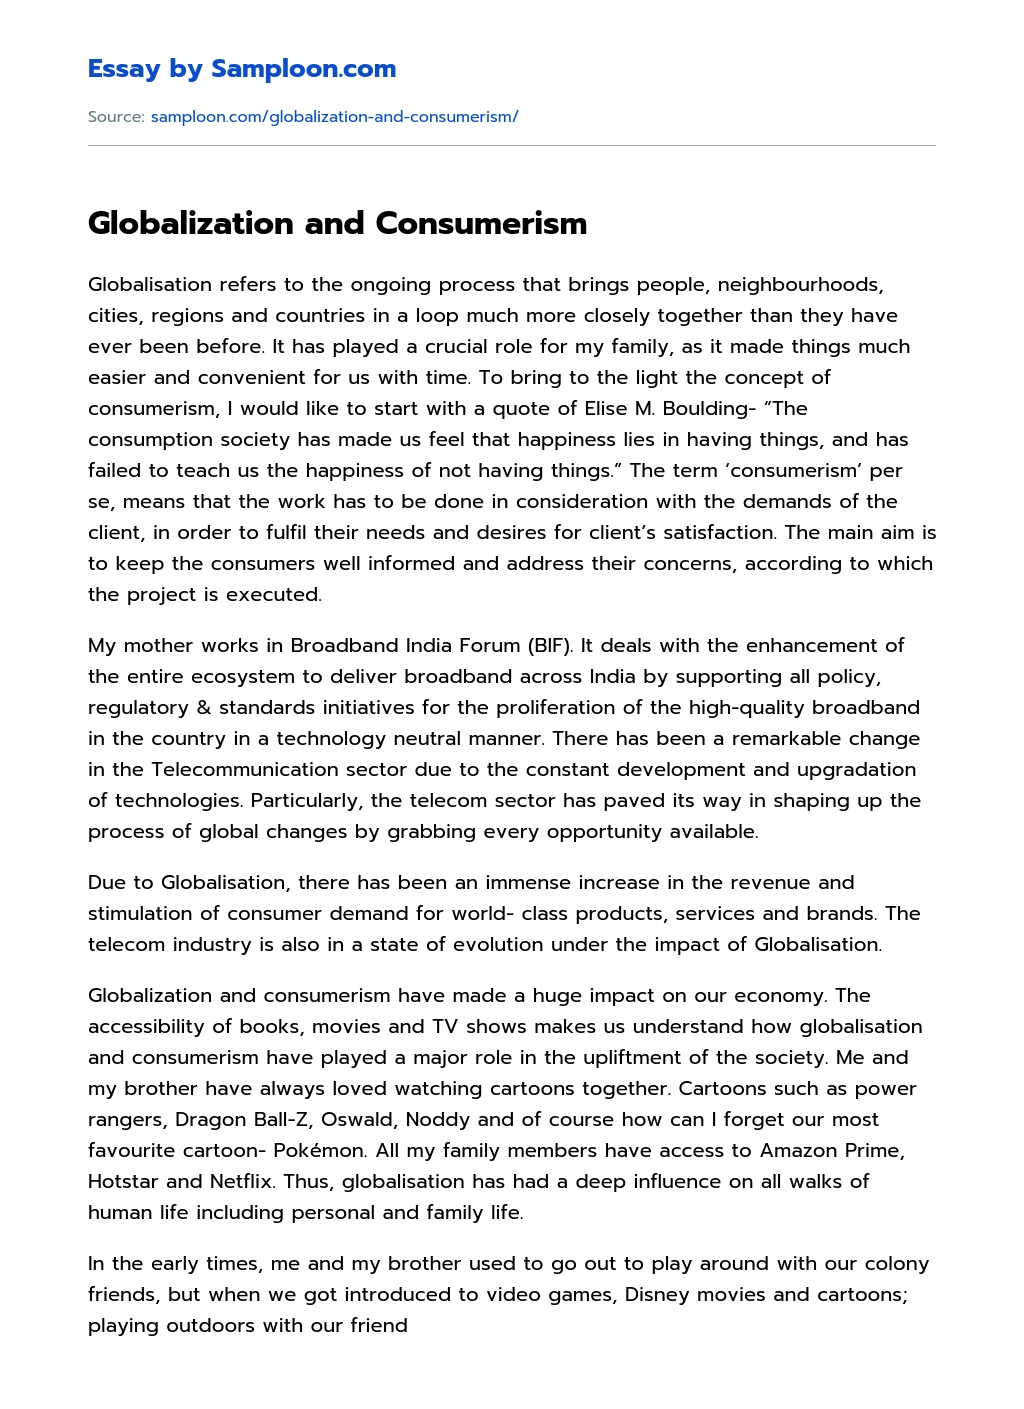 Globalization and Consumerism essay